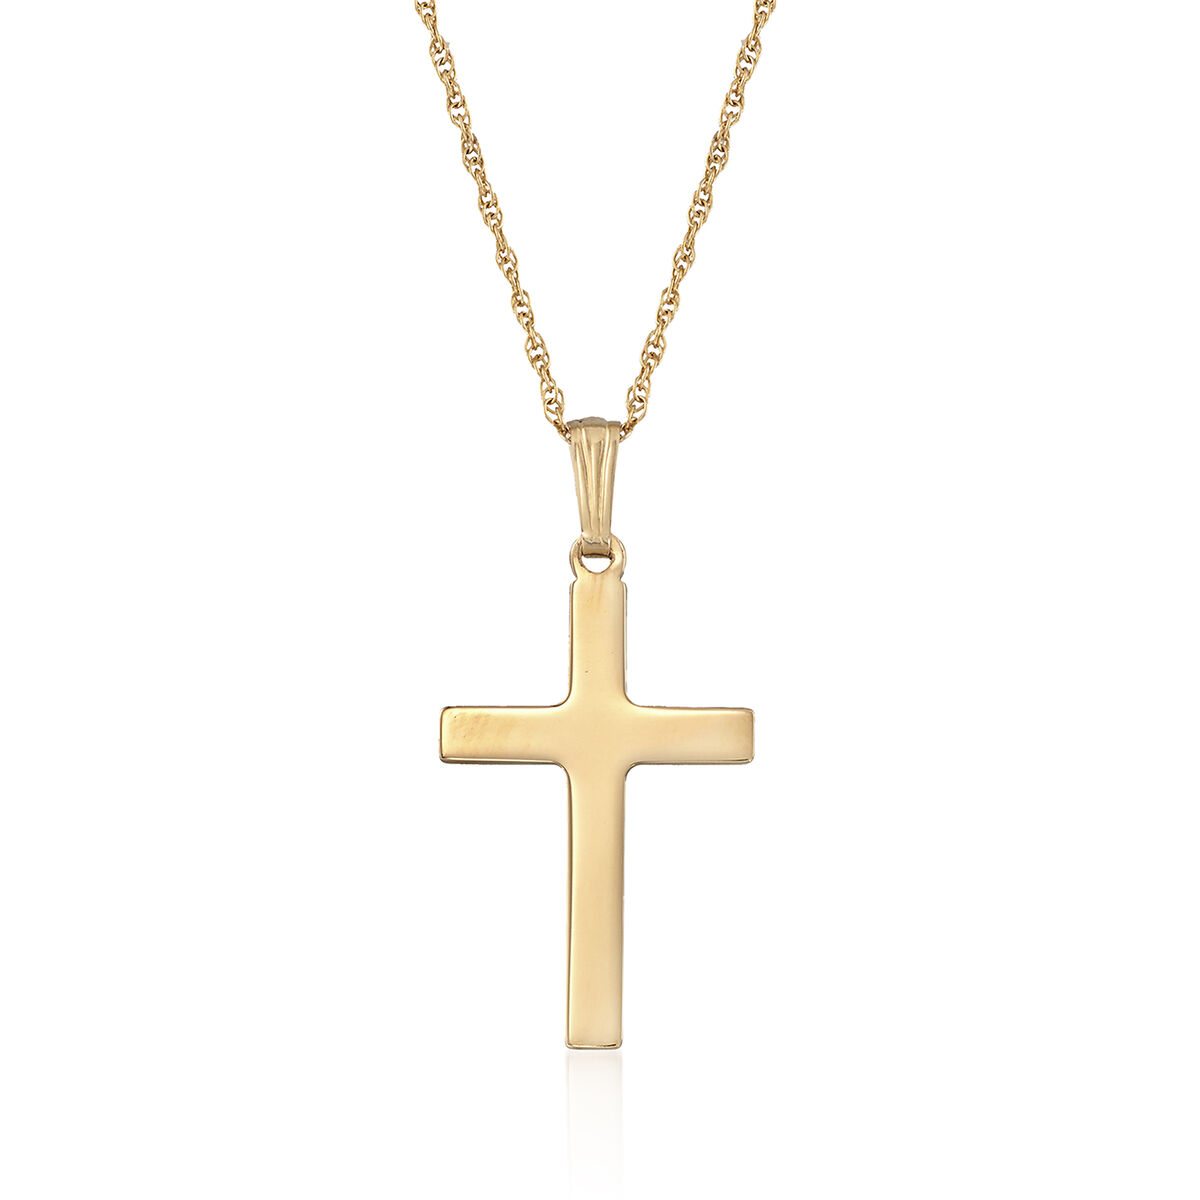 14kt Yellow Gold Cross Pendant Necklace. 18"